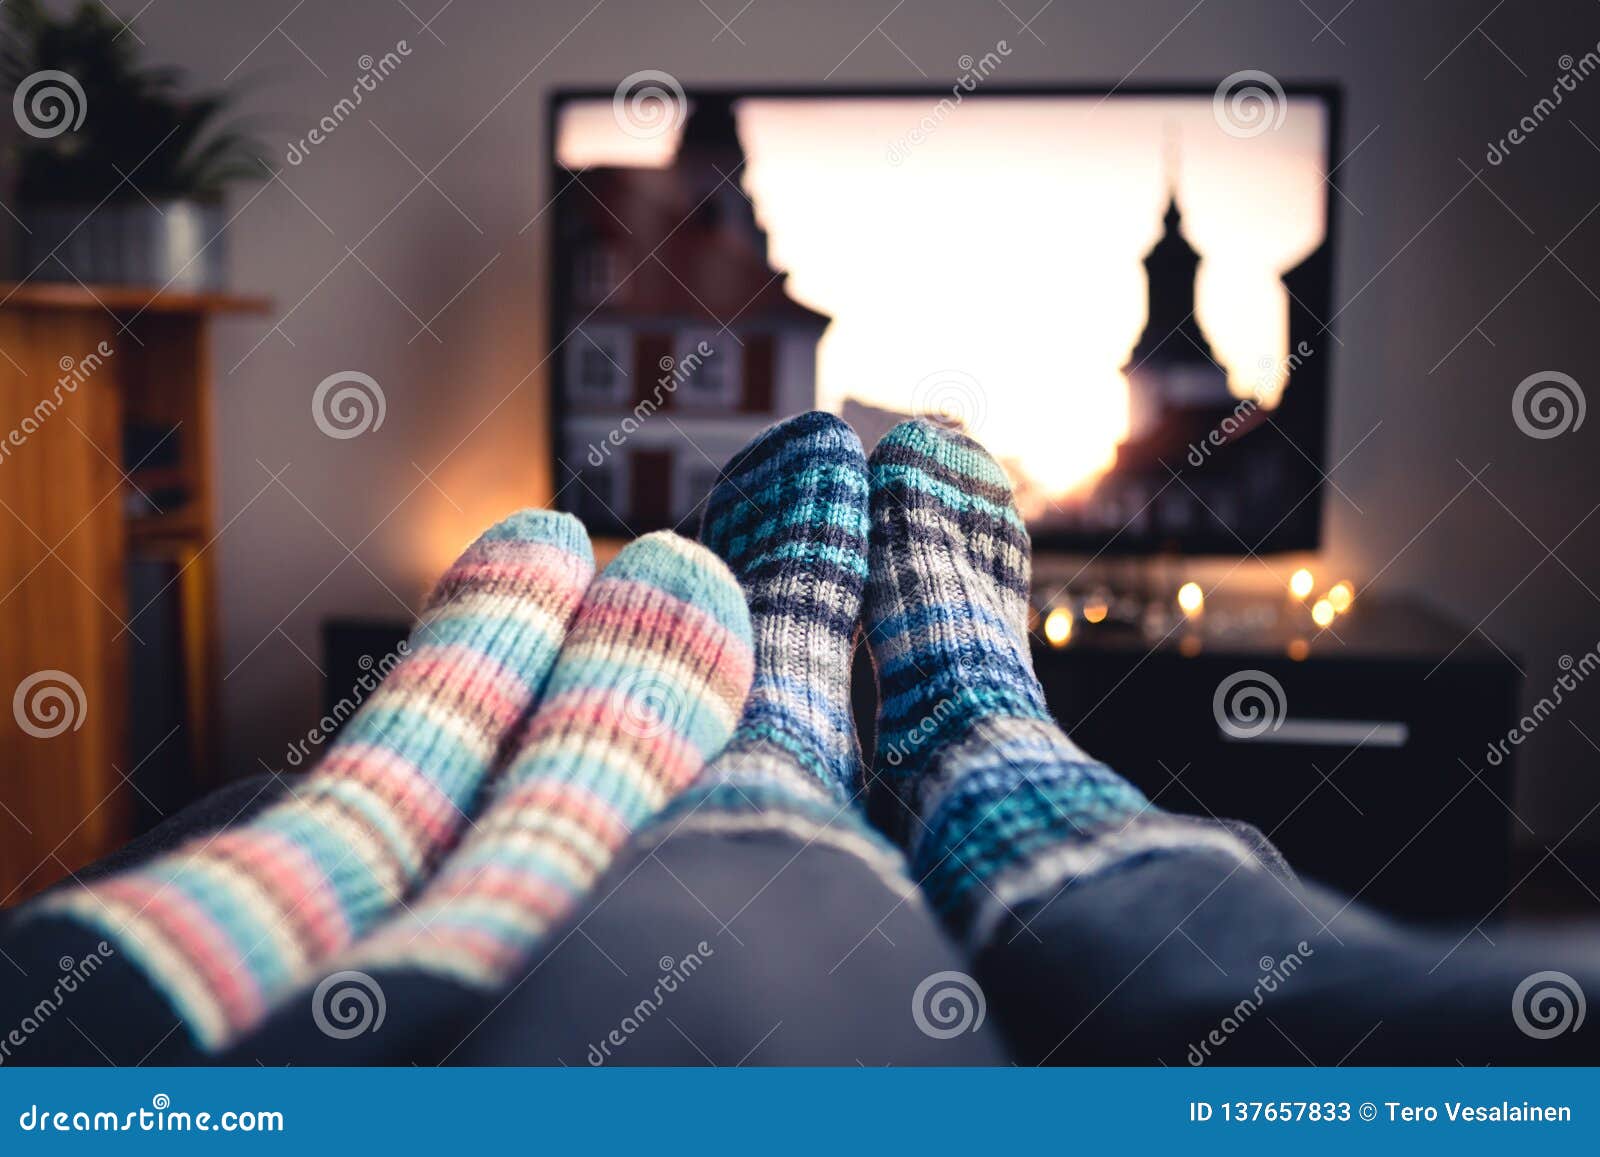 couple with socks and woolen stockings watching movies or series on tv in winter. woman and man sitting or lying together on sofa.